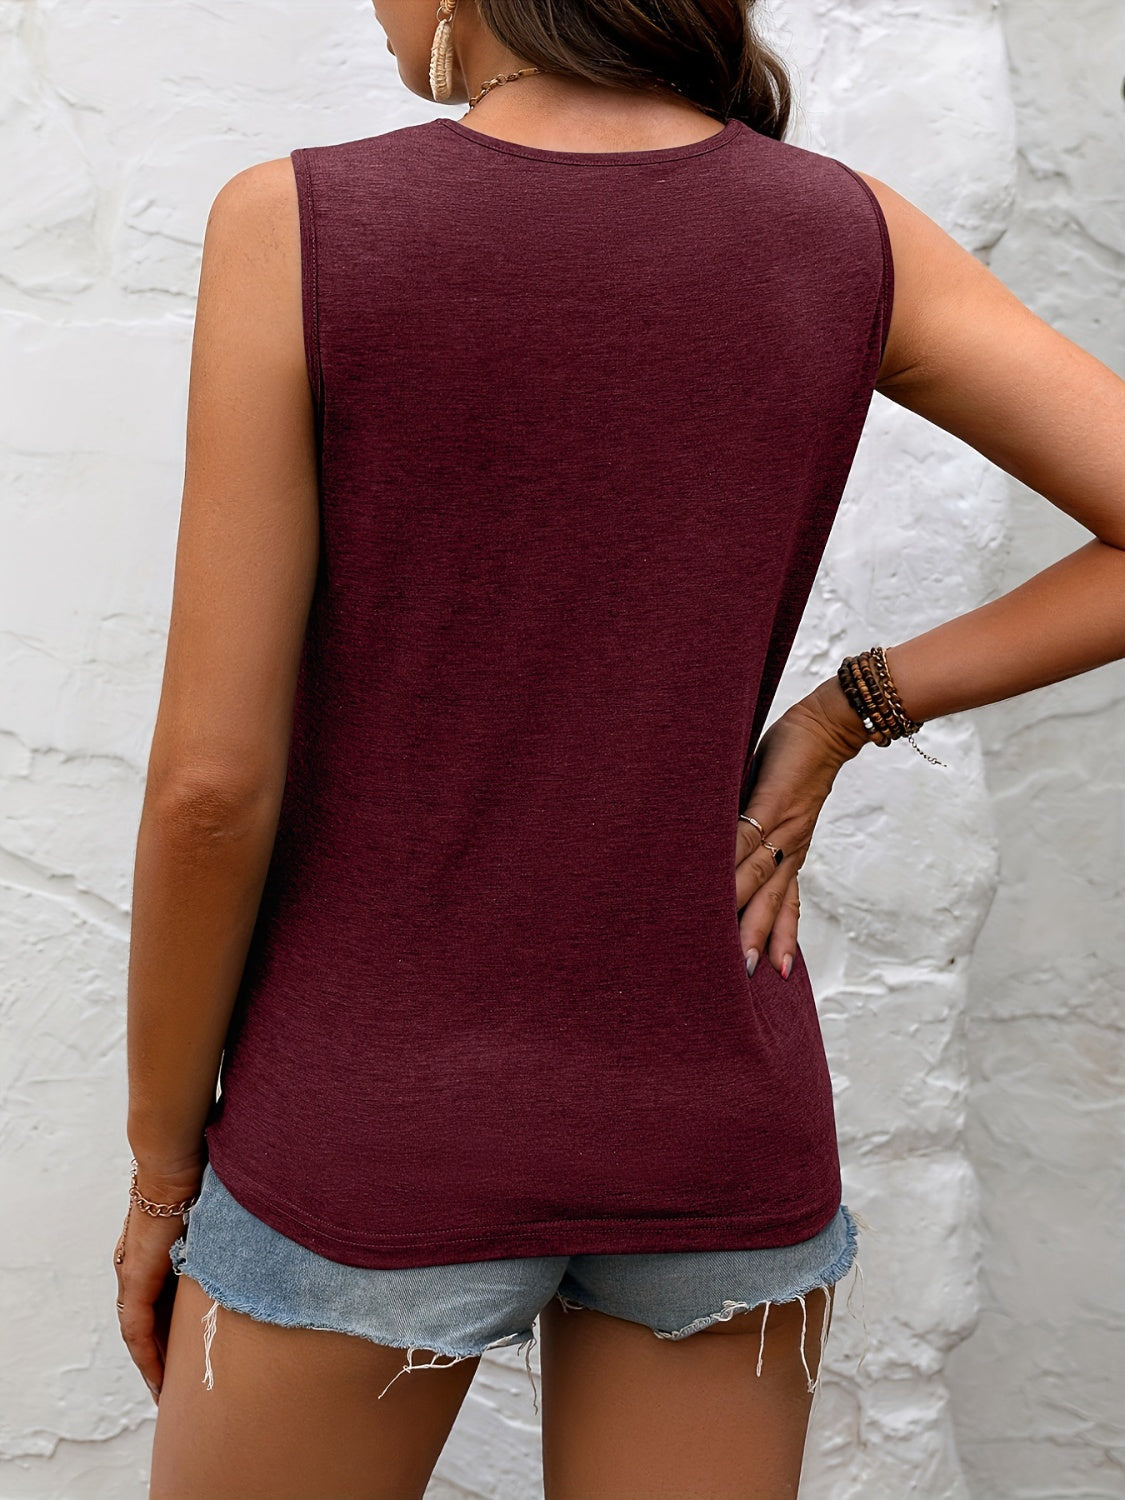 Stylish maroon sleeveless top with delicate black lace neckline, paired with distressed denim shorts for a chic summer look